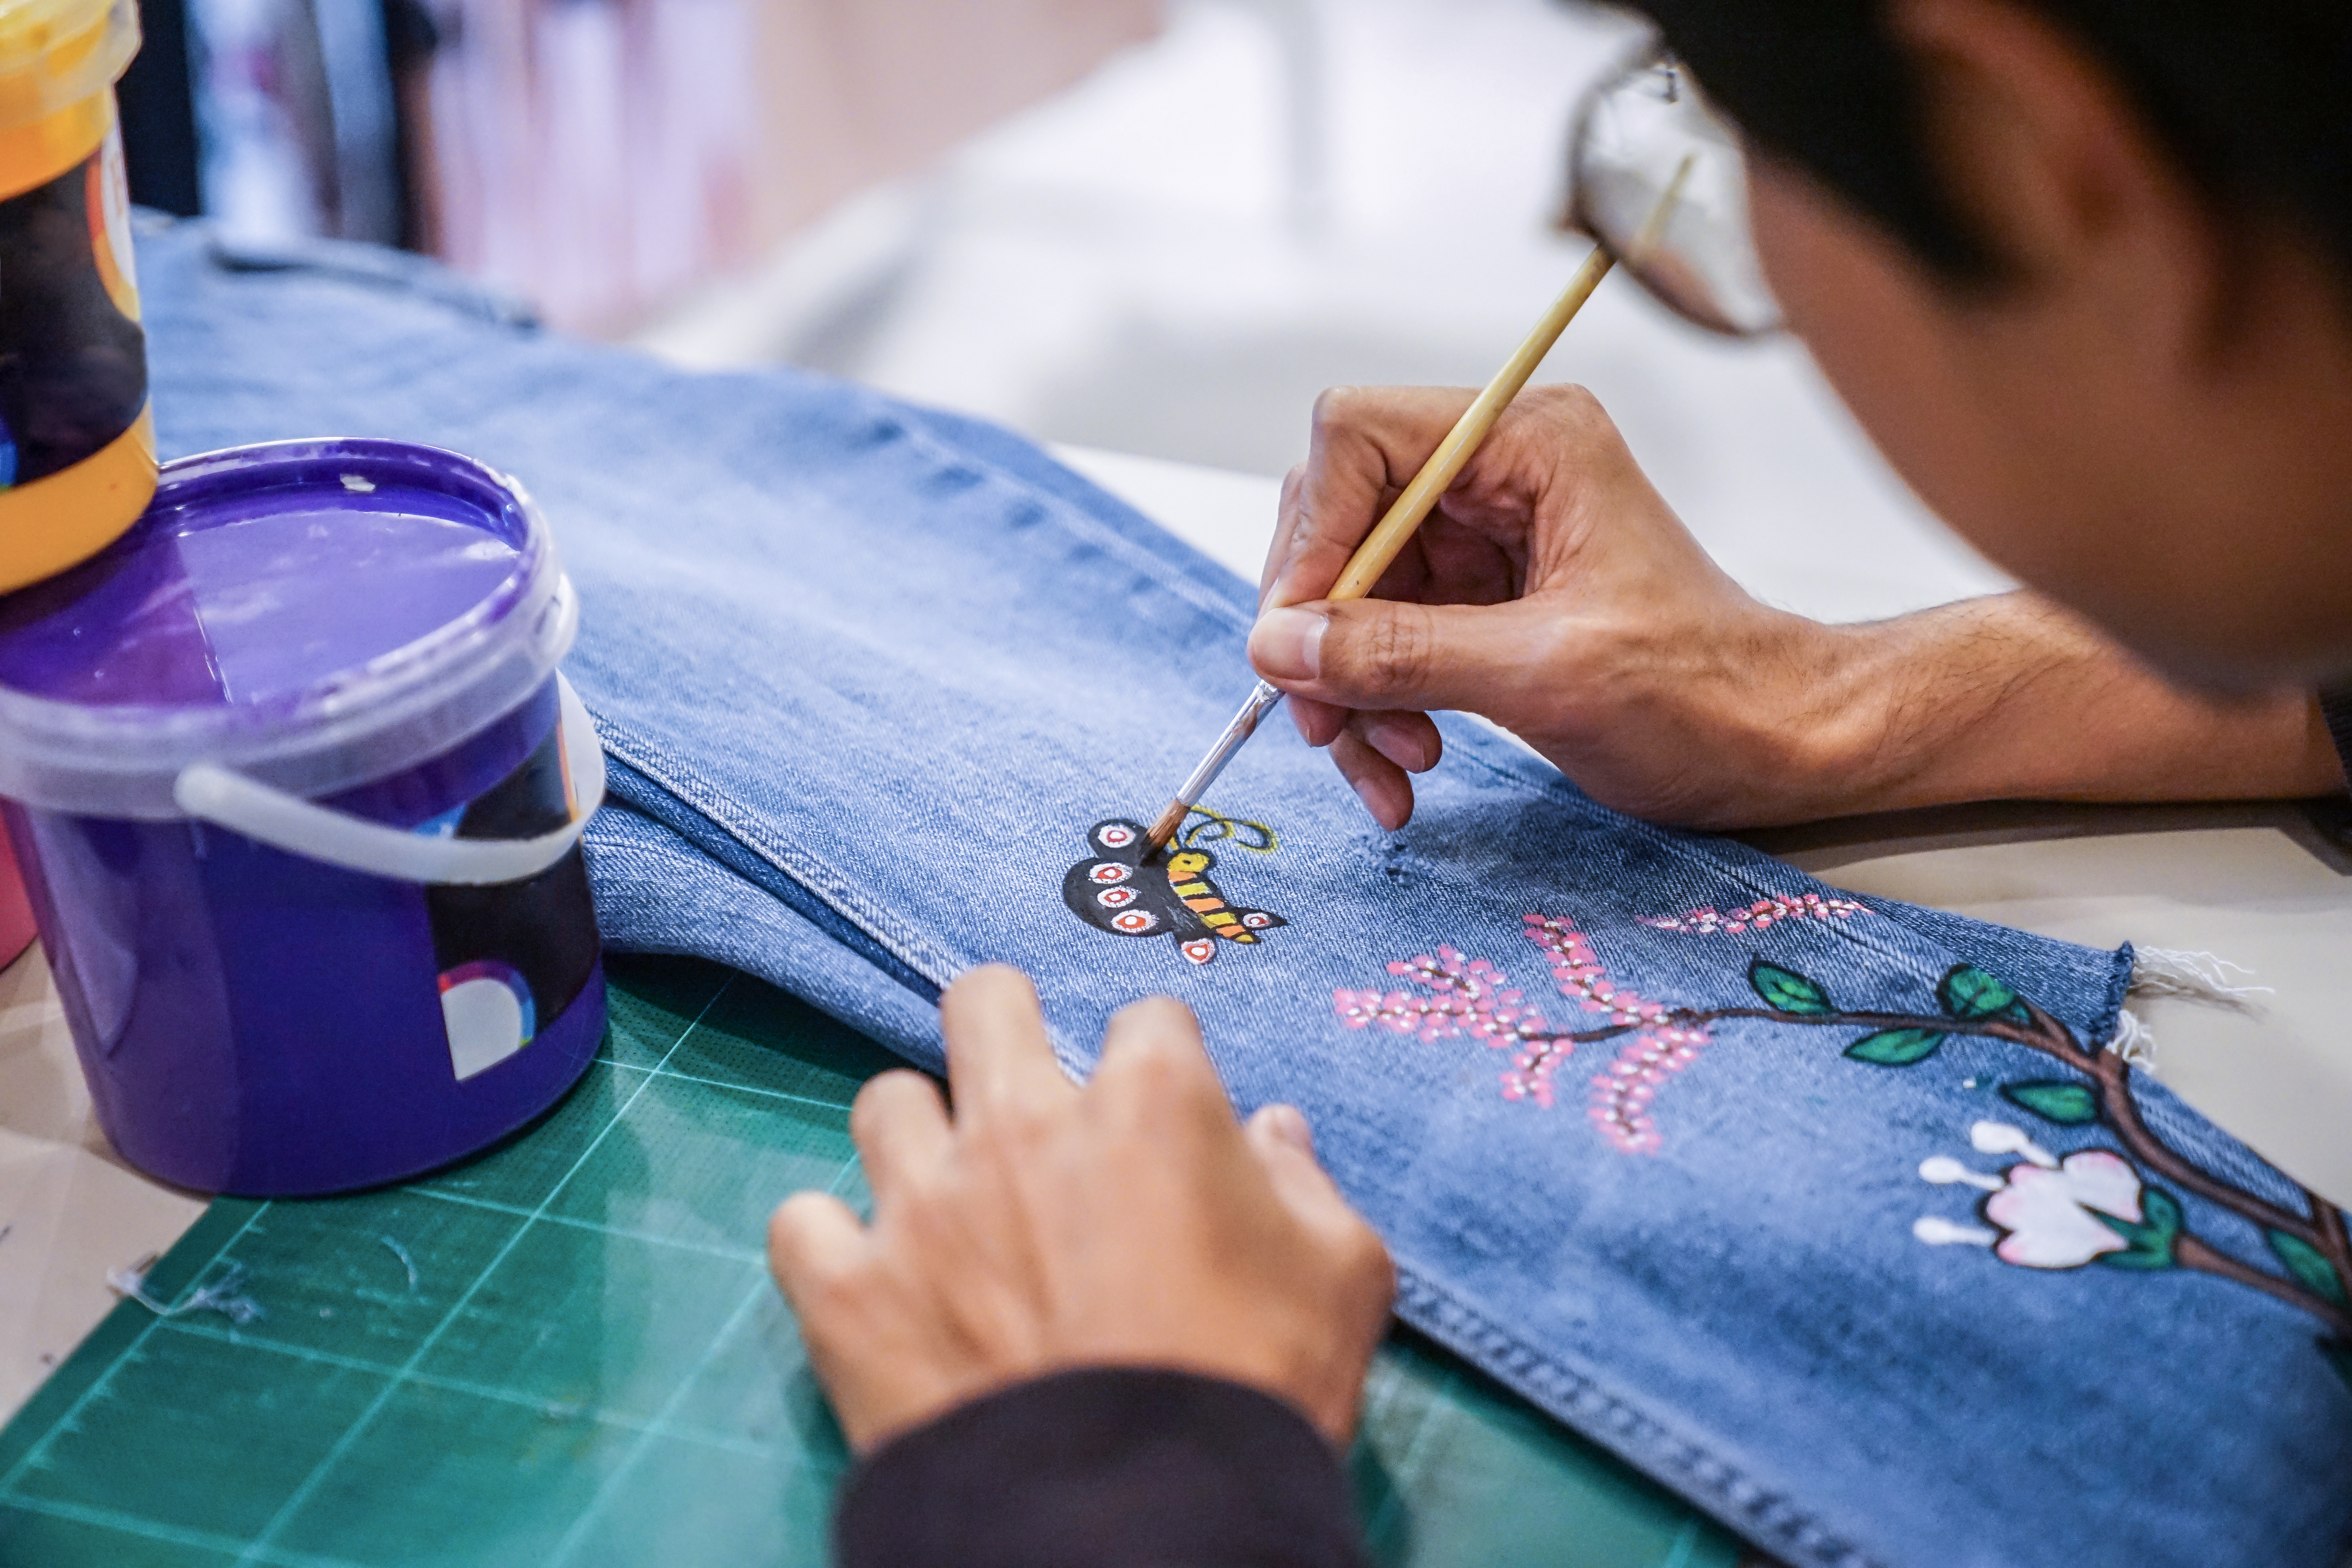 An artist painting a pair of jeans | Source: Shutter Stock